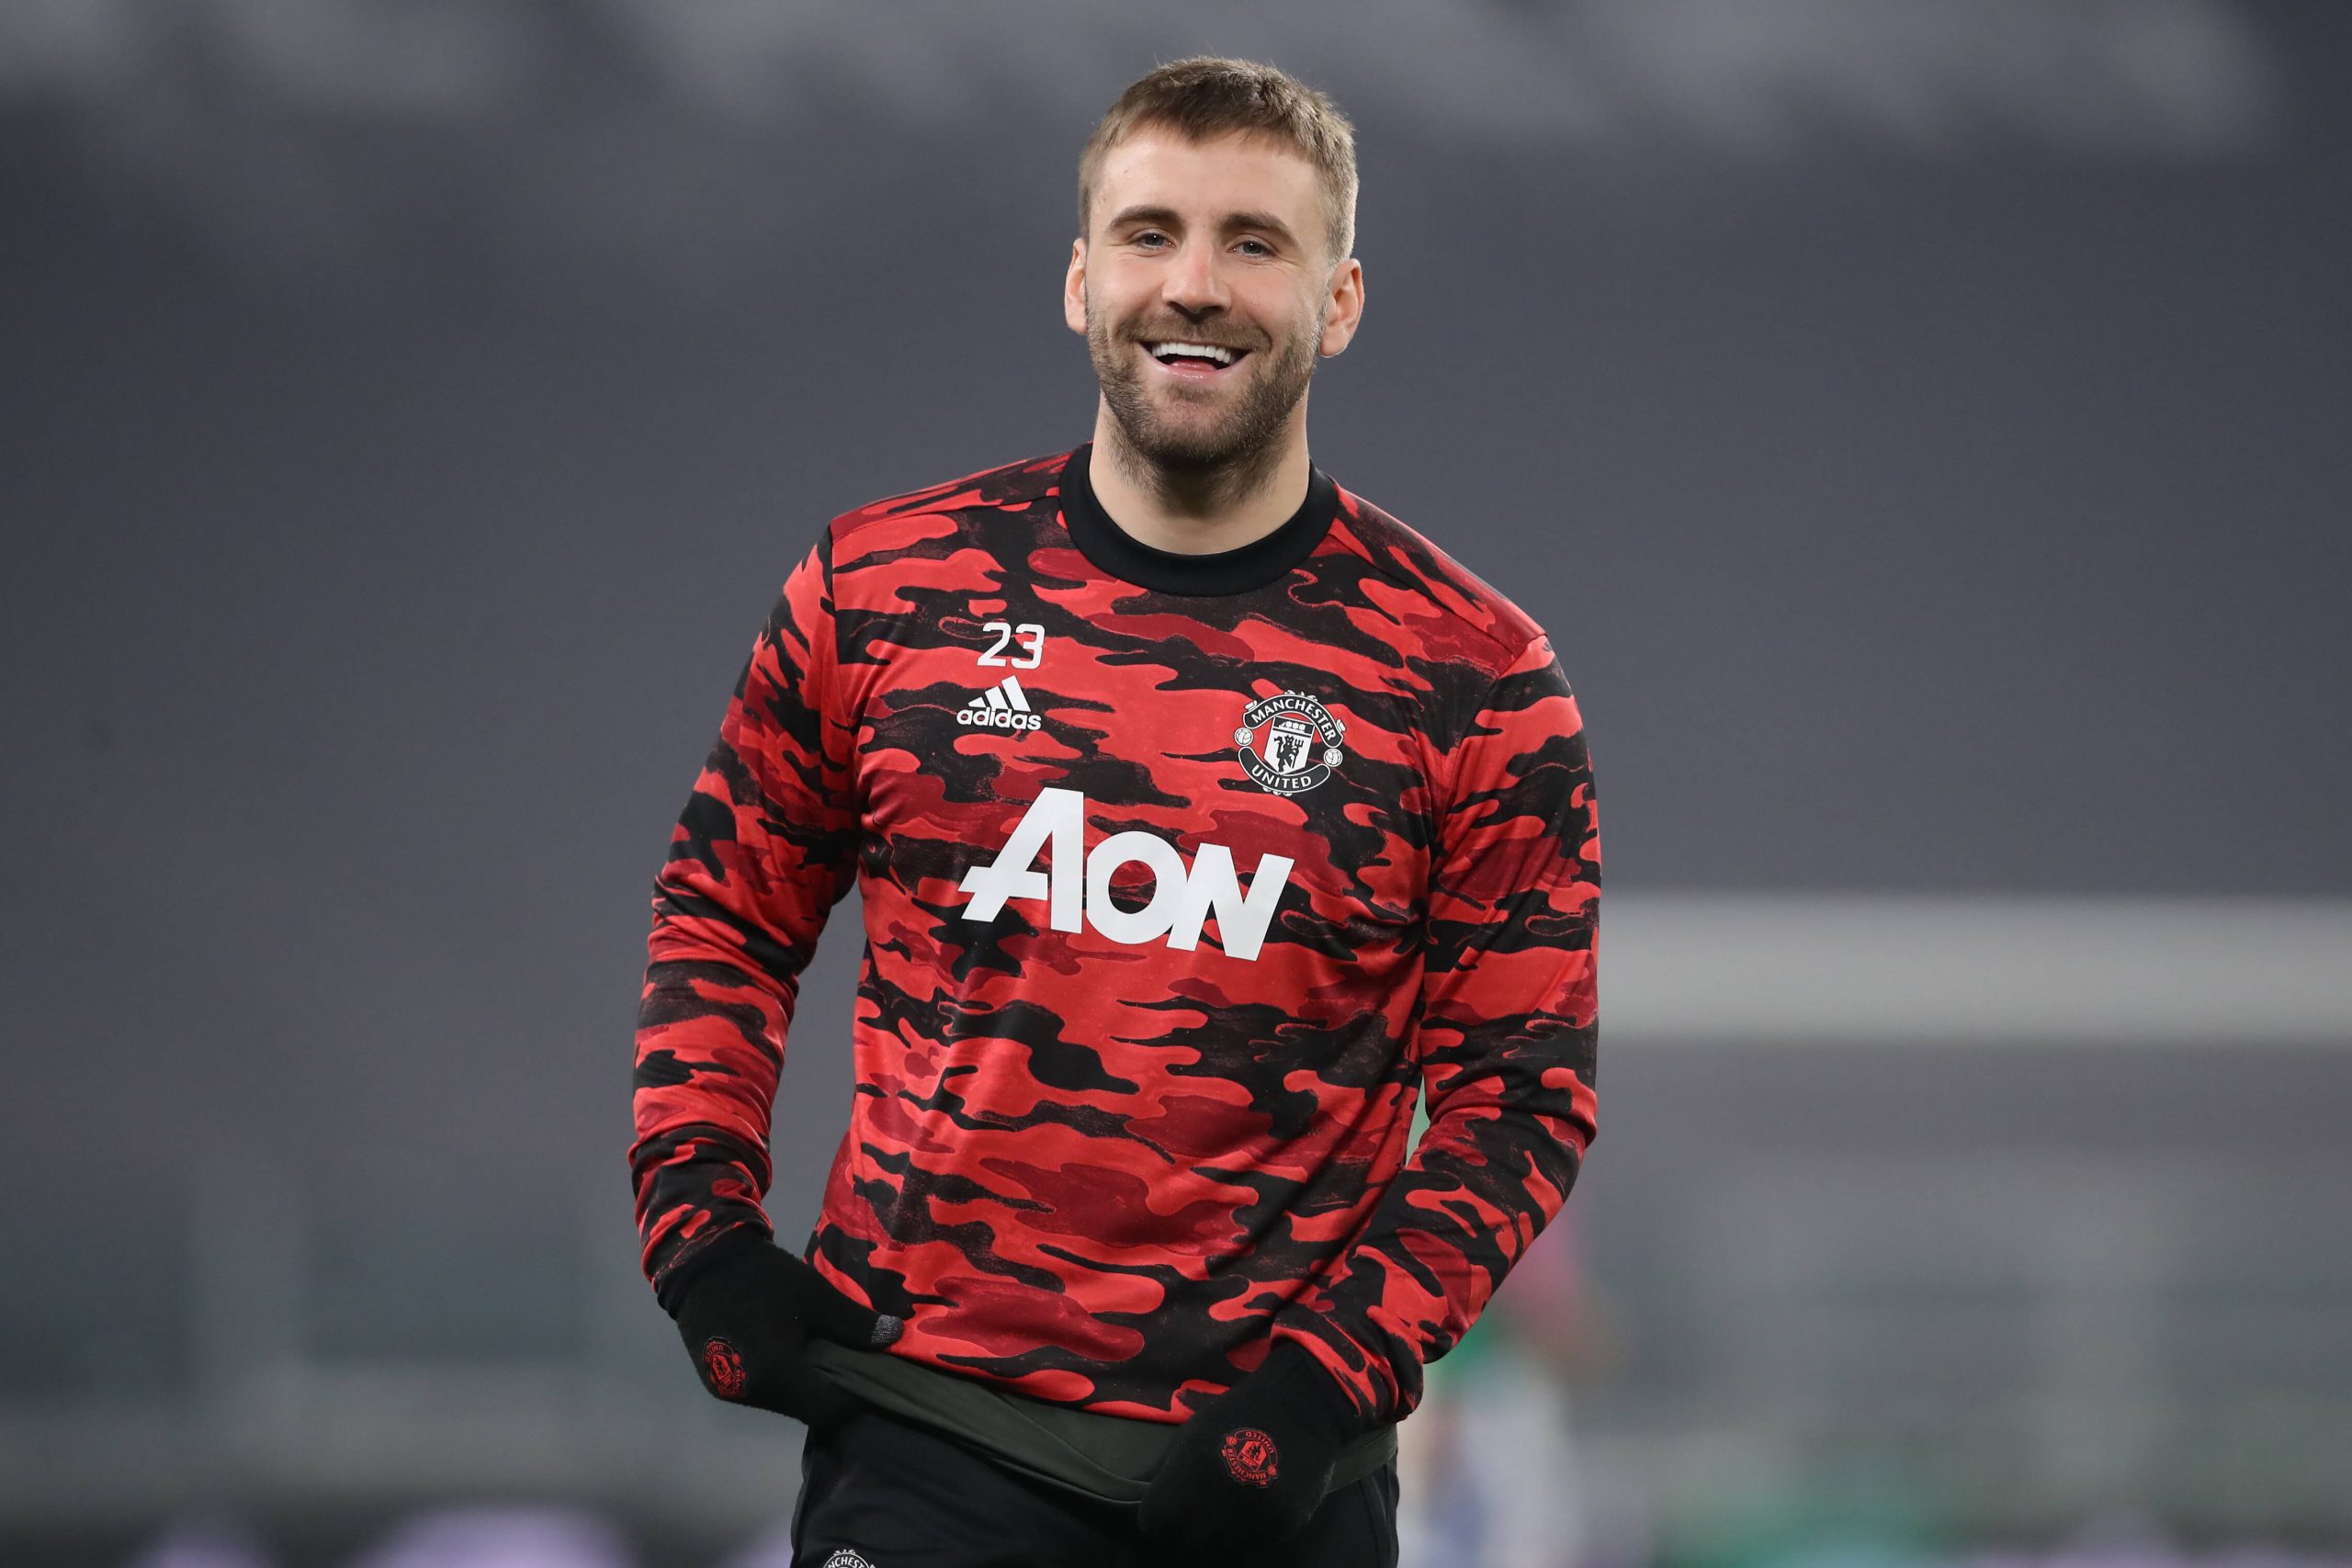 Luke Shaw happy about family-like atmosphere within the Manchester United squad.